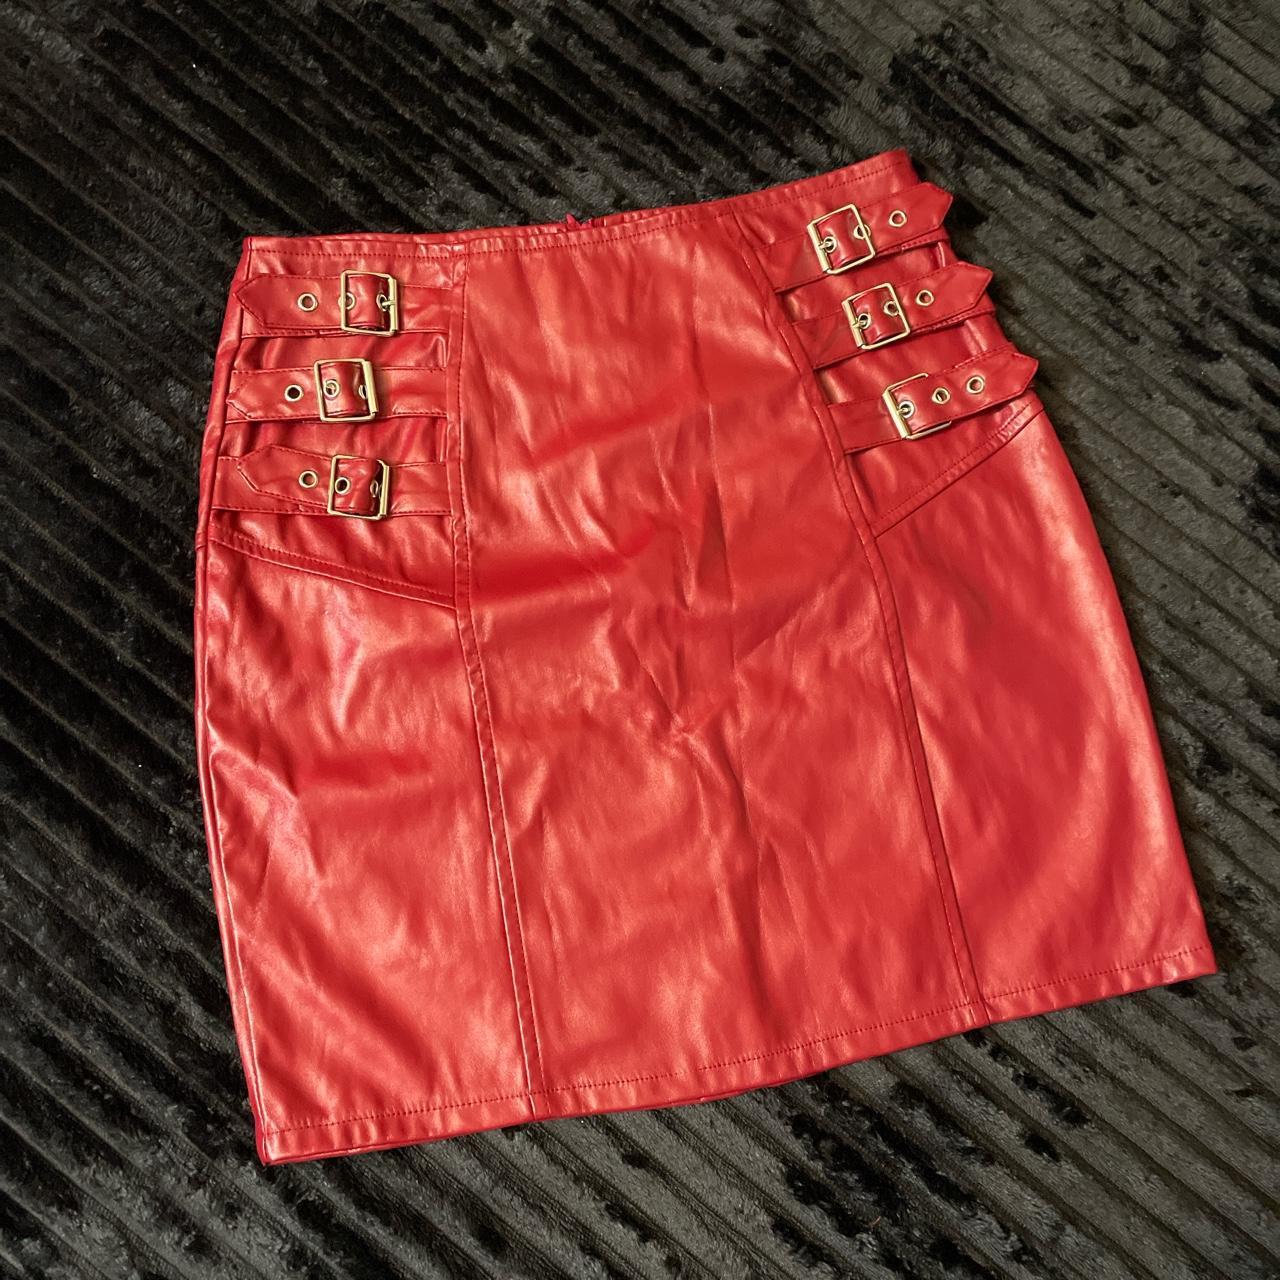 Discover 102+ boohoo leather skirt